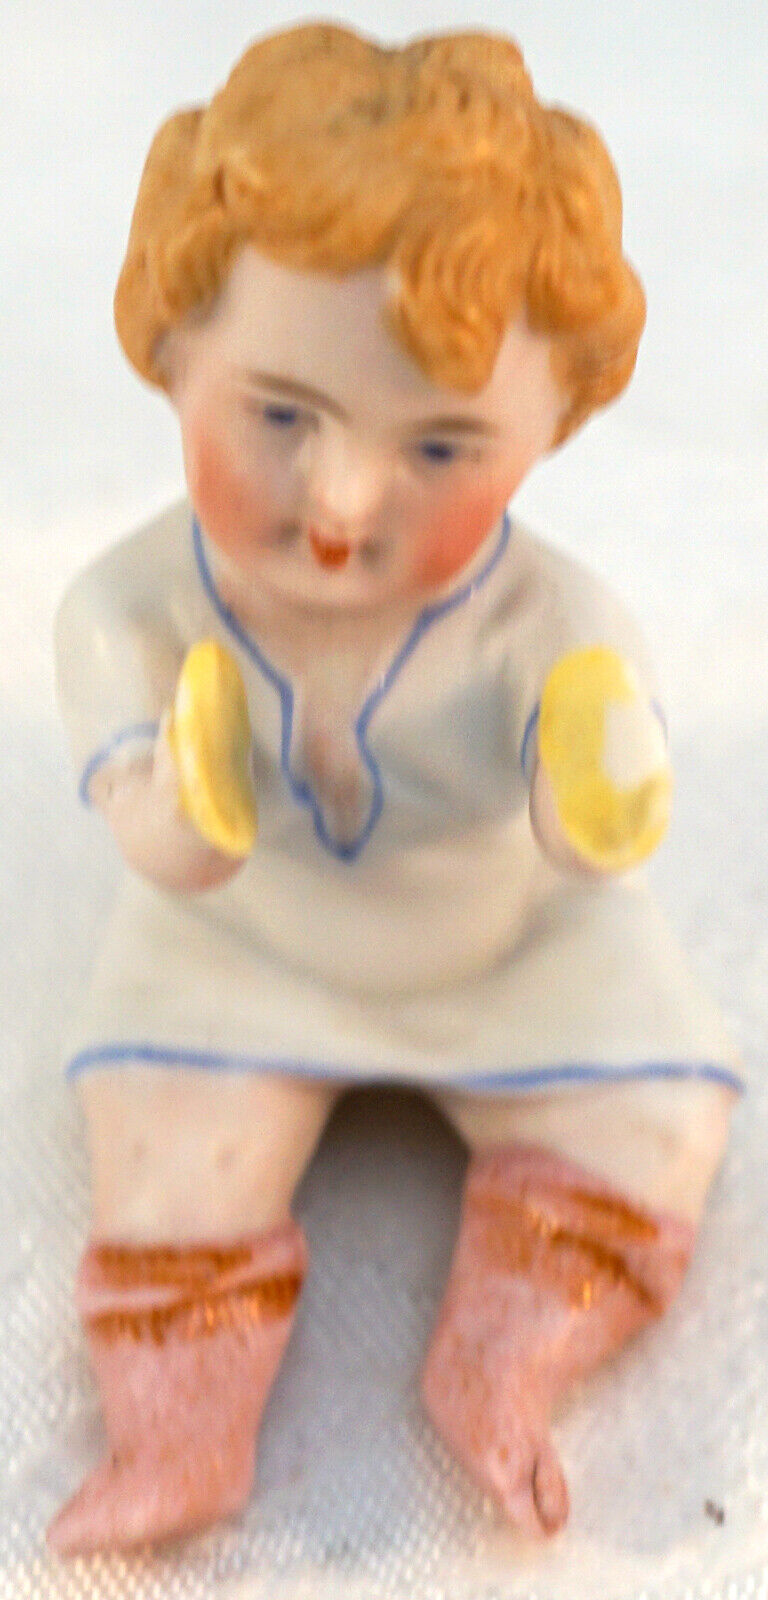 German Porcelain Bisque Baby Doll Figurine Playing the Cymbals